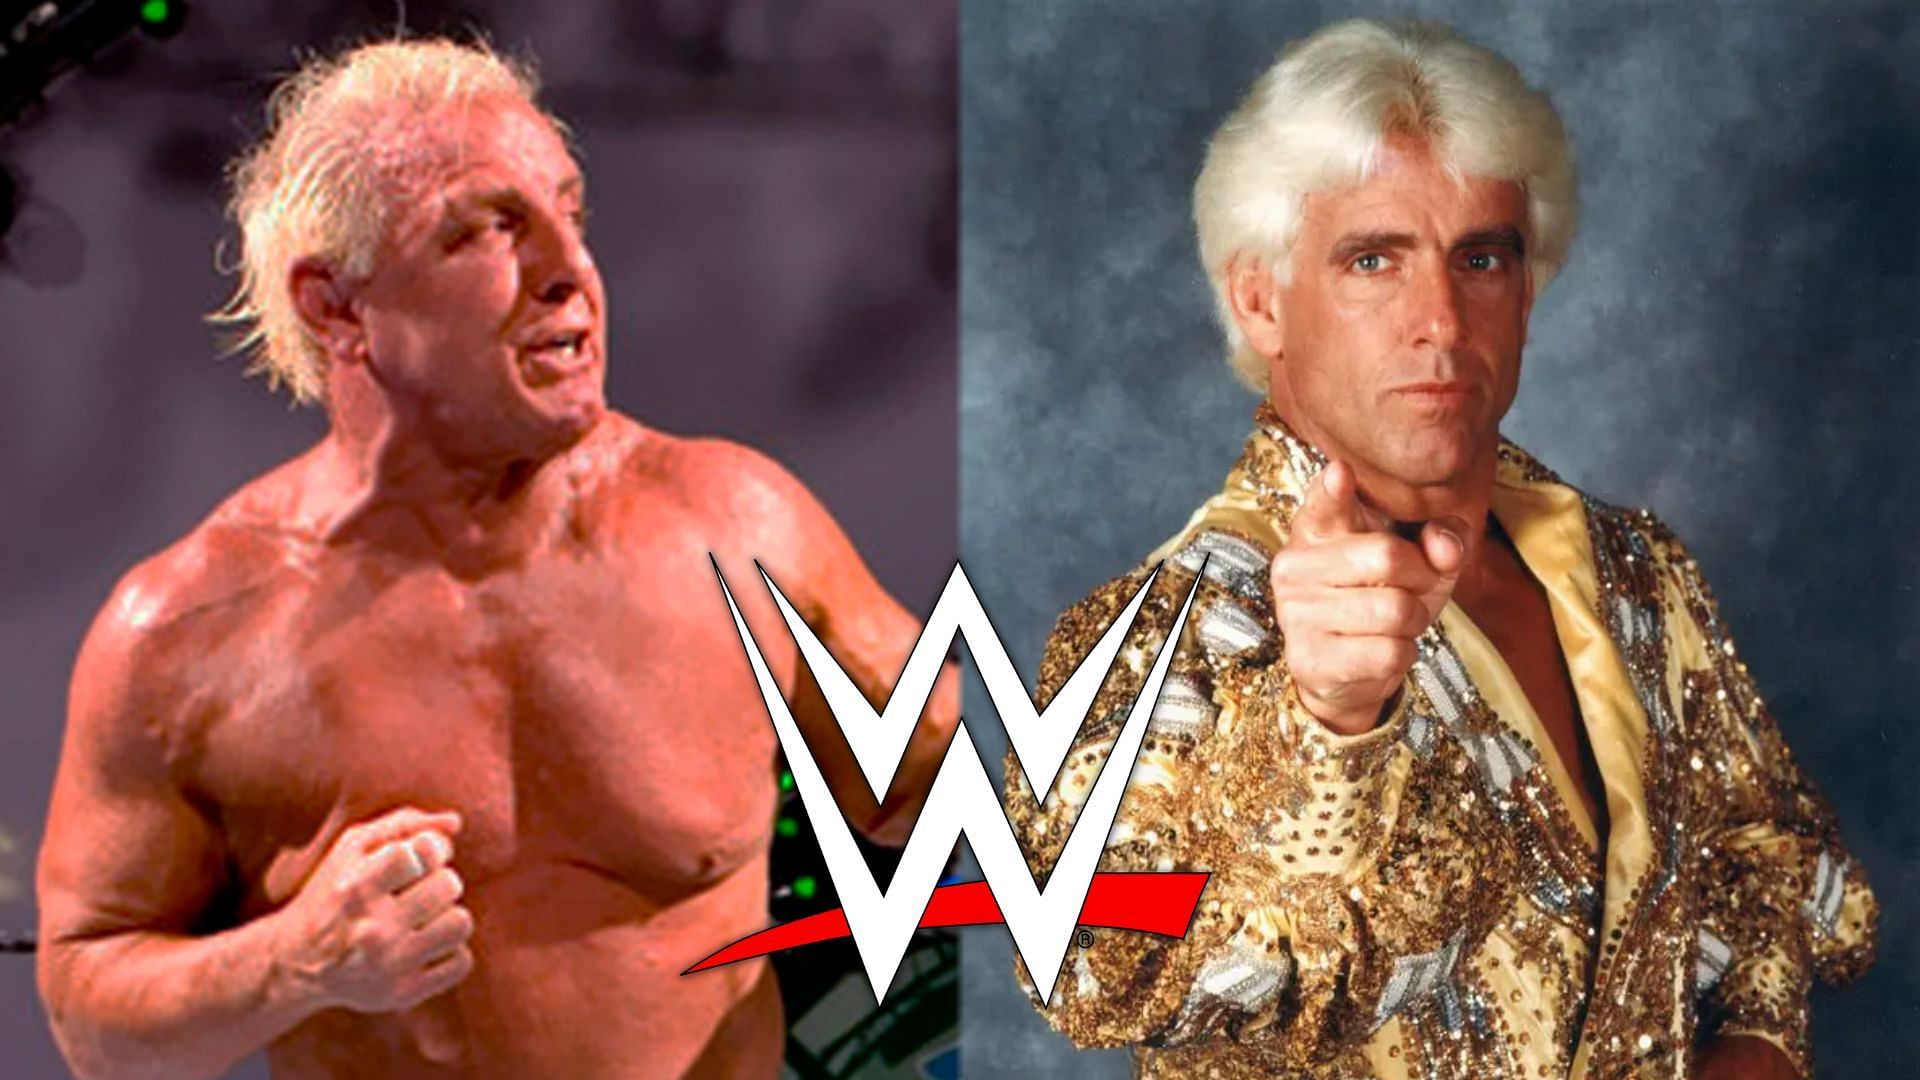 Ric Flair is a legend of the wrestling industry.